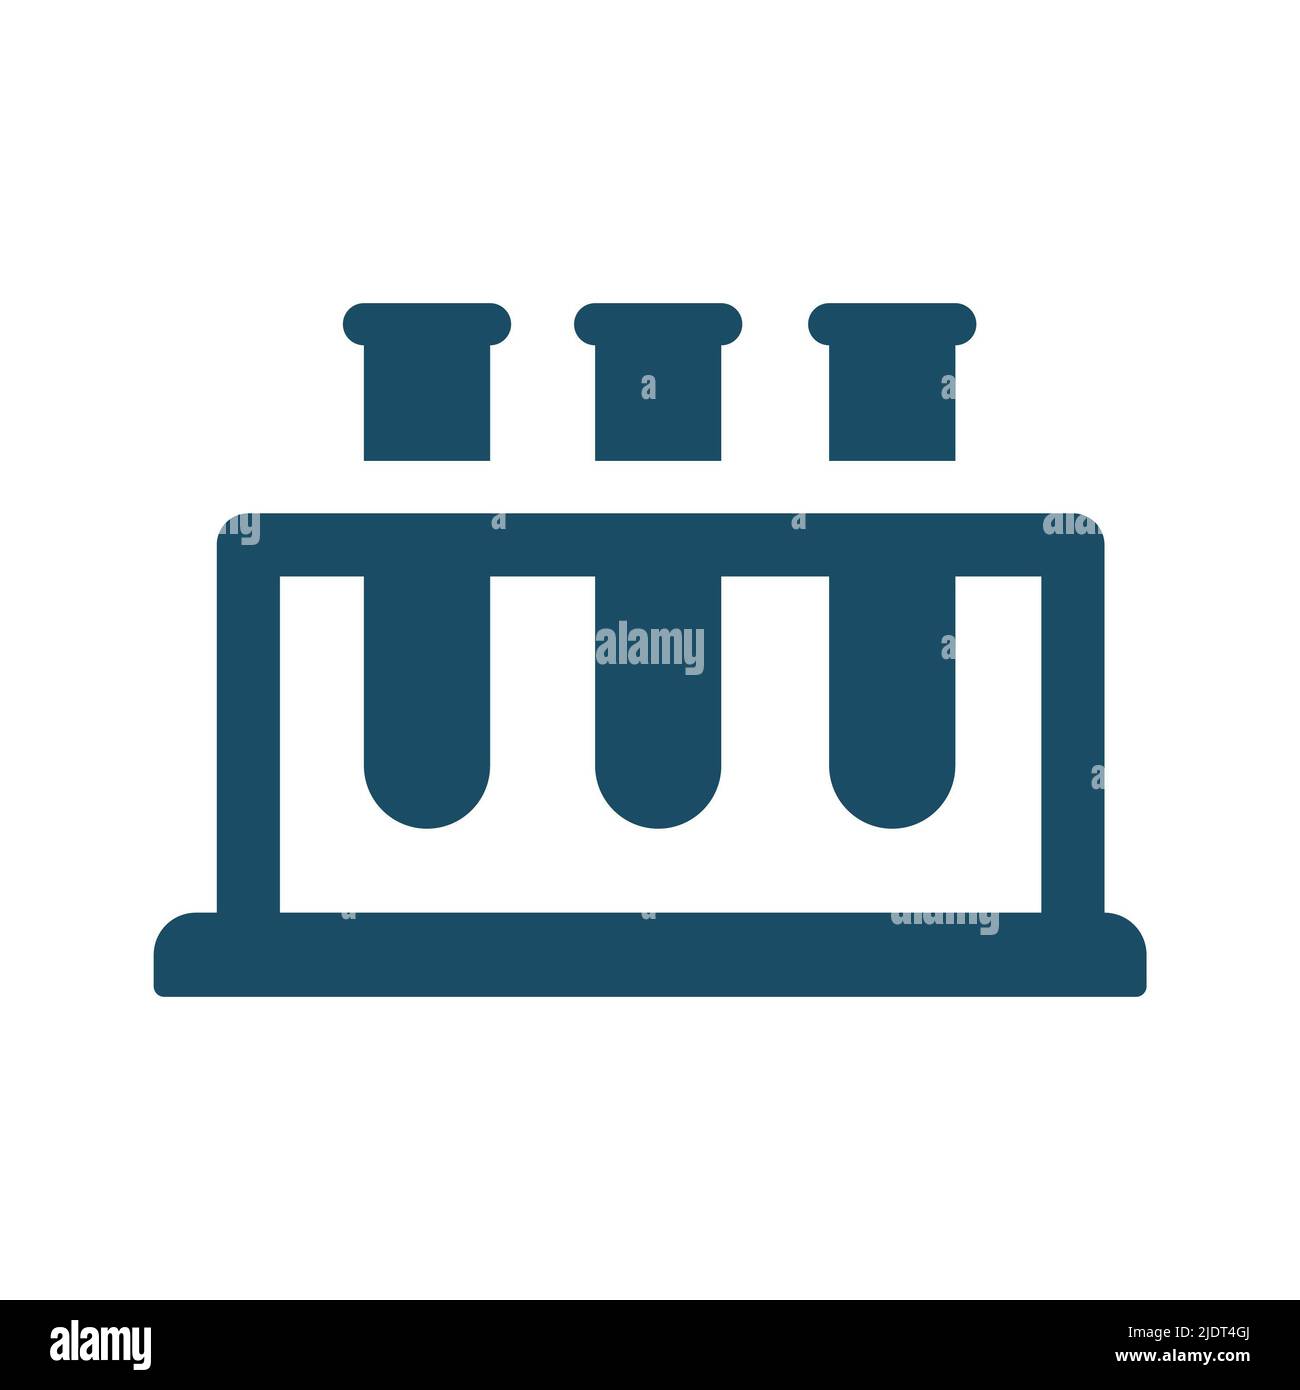 High quality dark blue laboratory tube icon. Pictogram, icon set, illustration. Useful for web site, banner, greeting cards, apps and social media pos Stock Photo